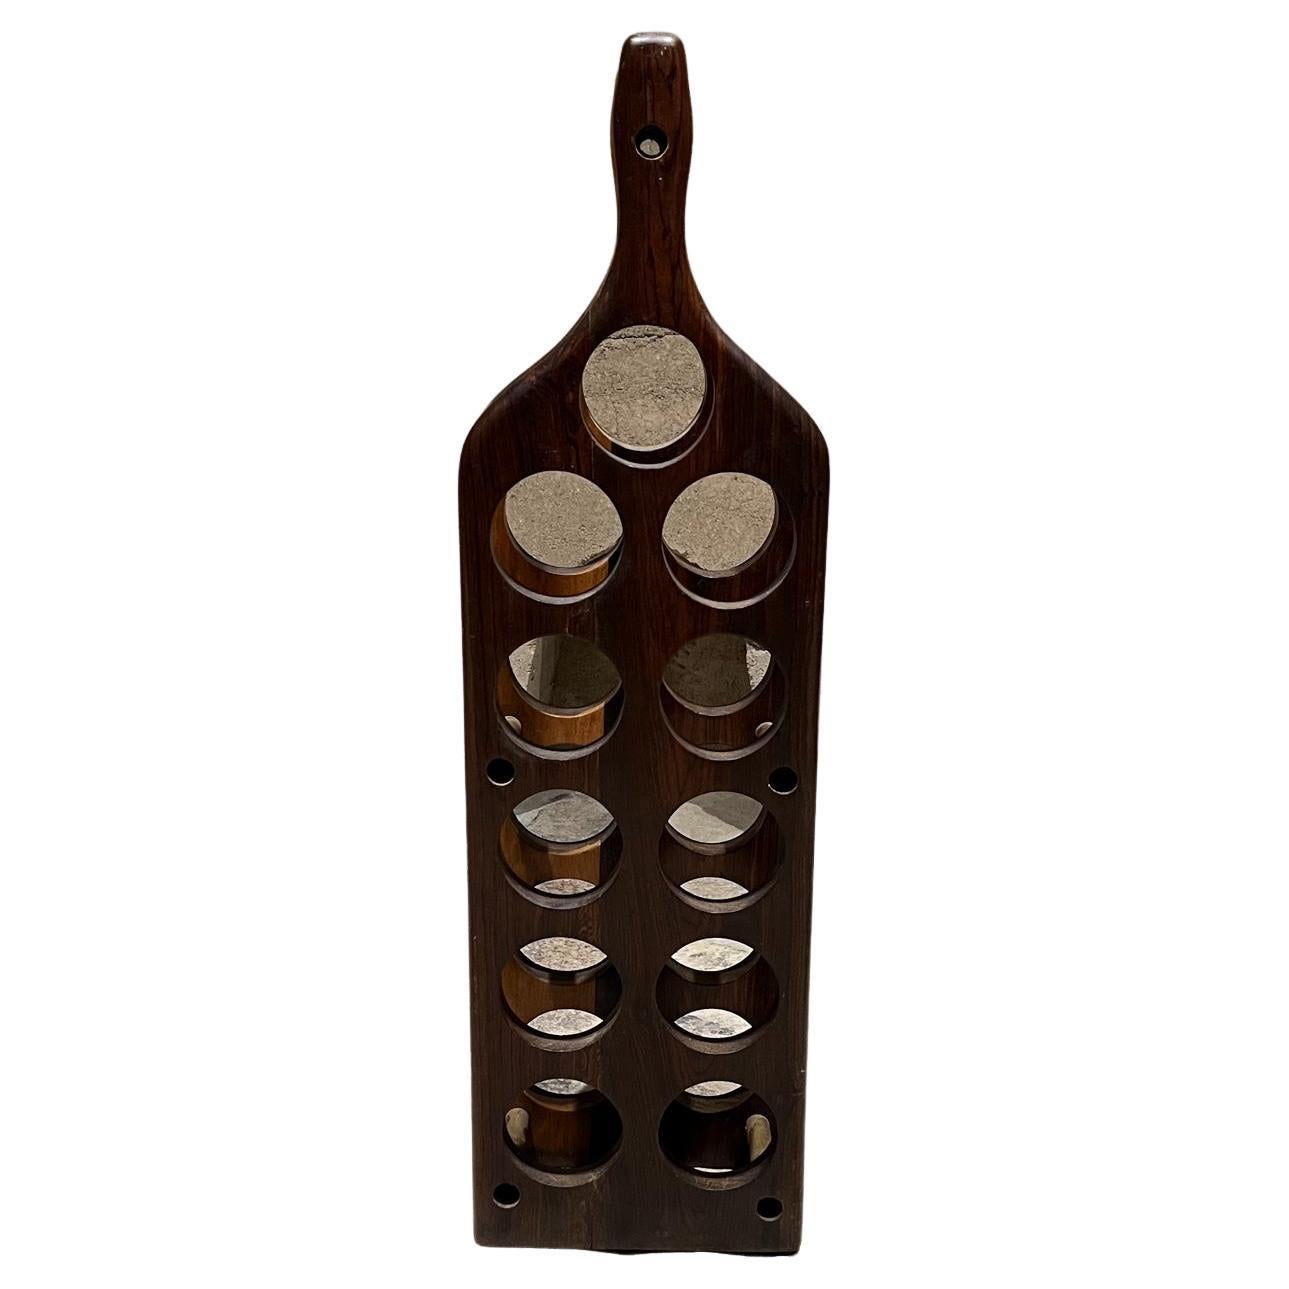 Wine rack
11 bottle exotic wood wine rack in the shape of a wine bottle.
Attributed to Don S Shoemaker. Mexico 1960s.
Unmarked
Designed in rosewood brass and Cocobolo wood.
Rack can hold up to eleven (11) bottles. It is connected by brass